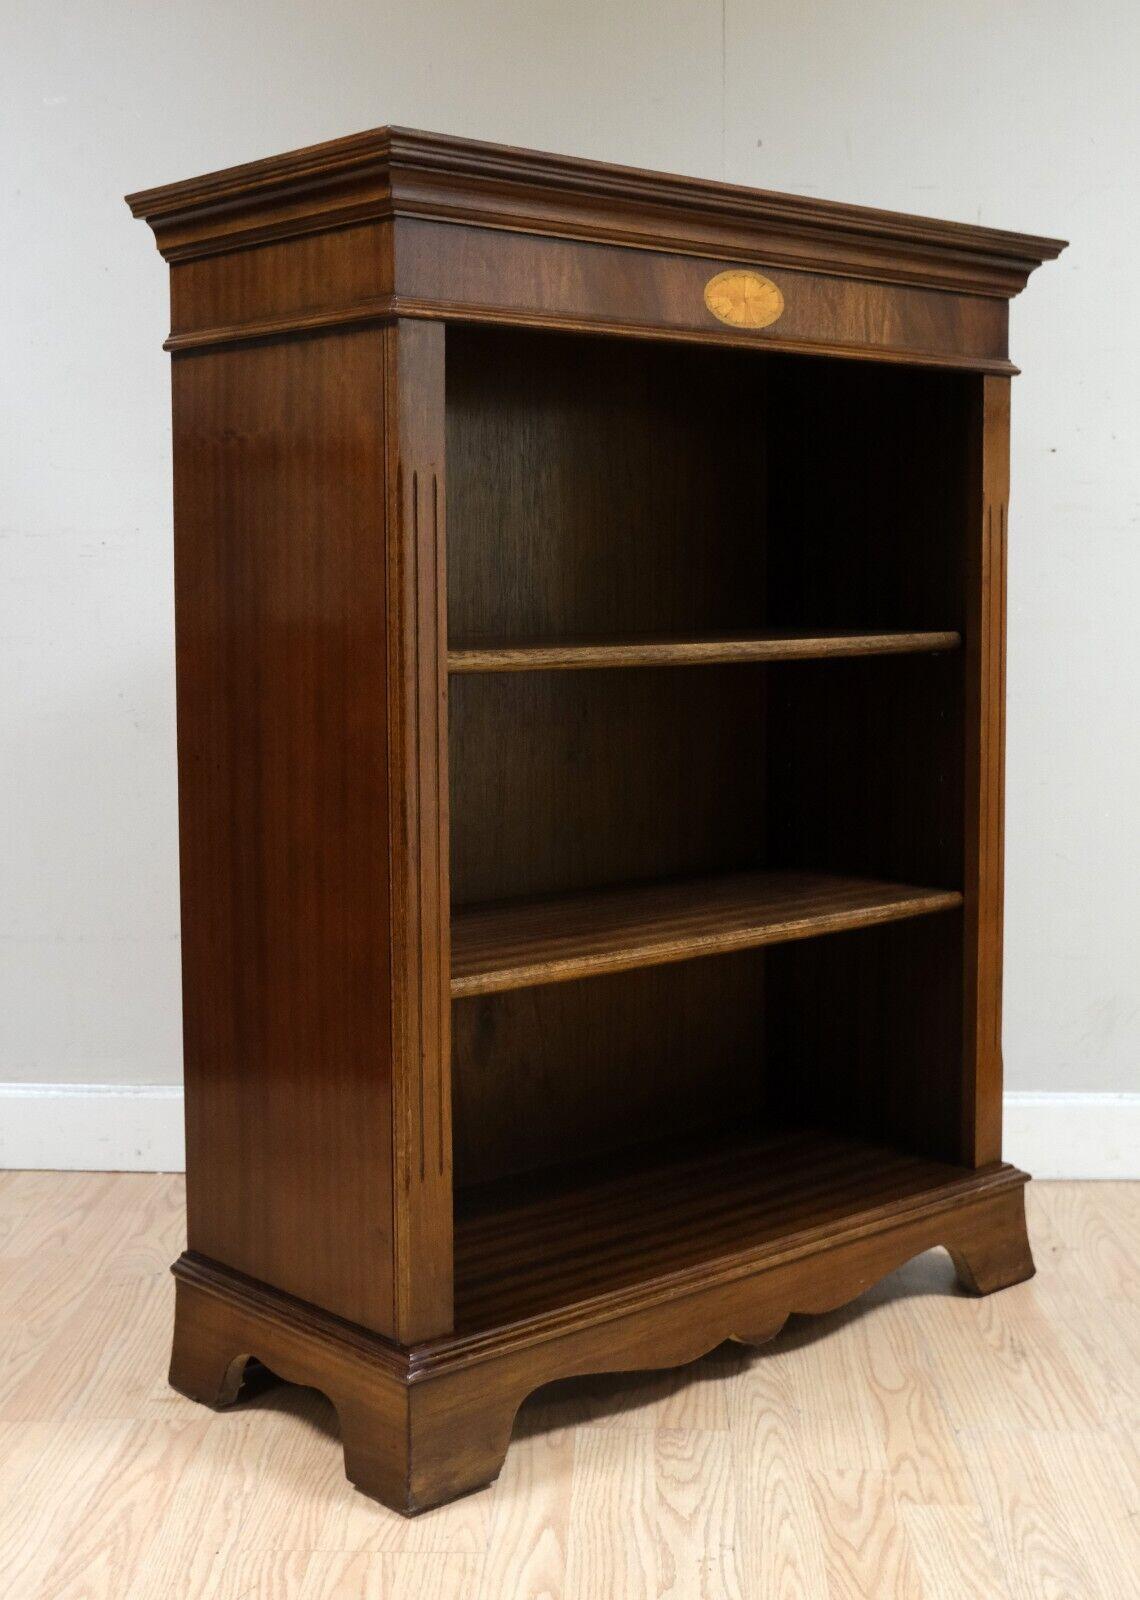 We are delighted to offer for sale this lovely low open library bookcase with adjustable shelves with inlay decoration. 

A very well made, stable and good looking piece is ideal for any room as it doesn't take much space. The piece features a pair